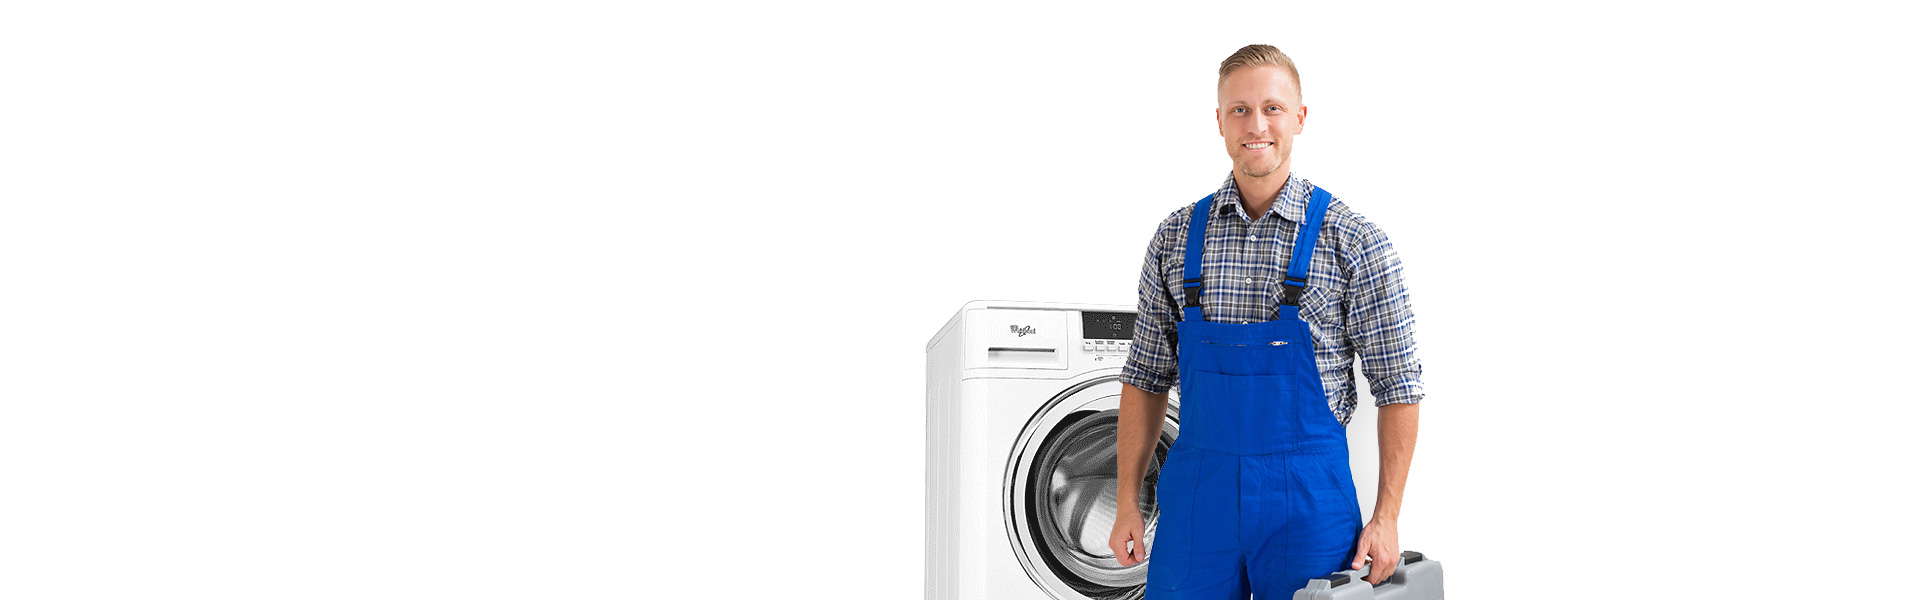 Appliance Repair in Olympia WA with Discount